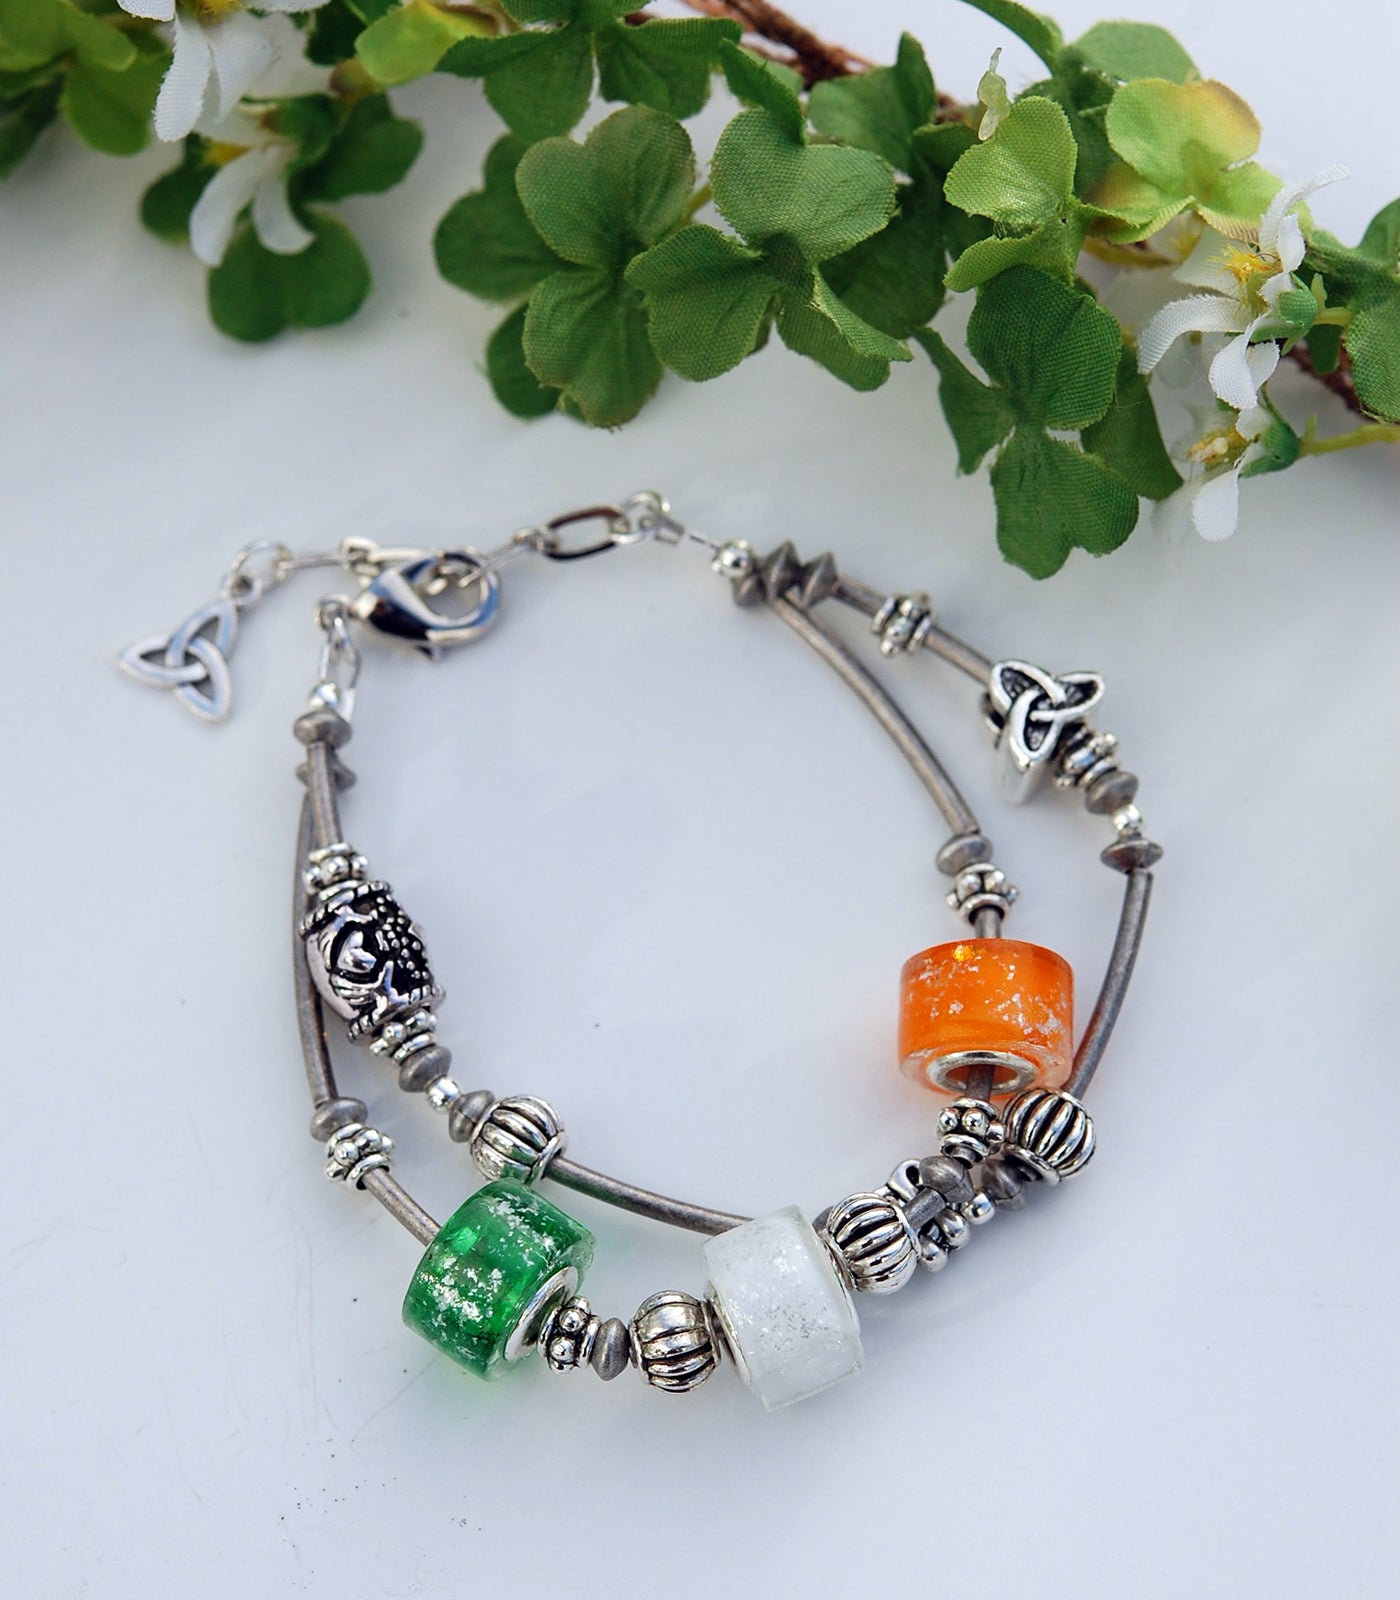 Tricolors of Ireland Double Bracelet with Claddagh